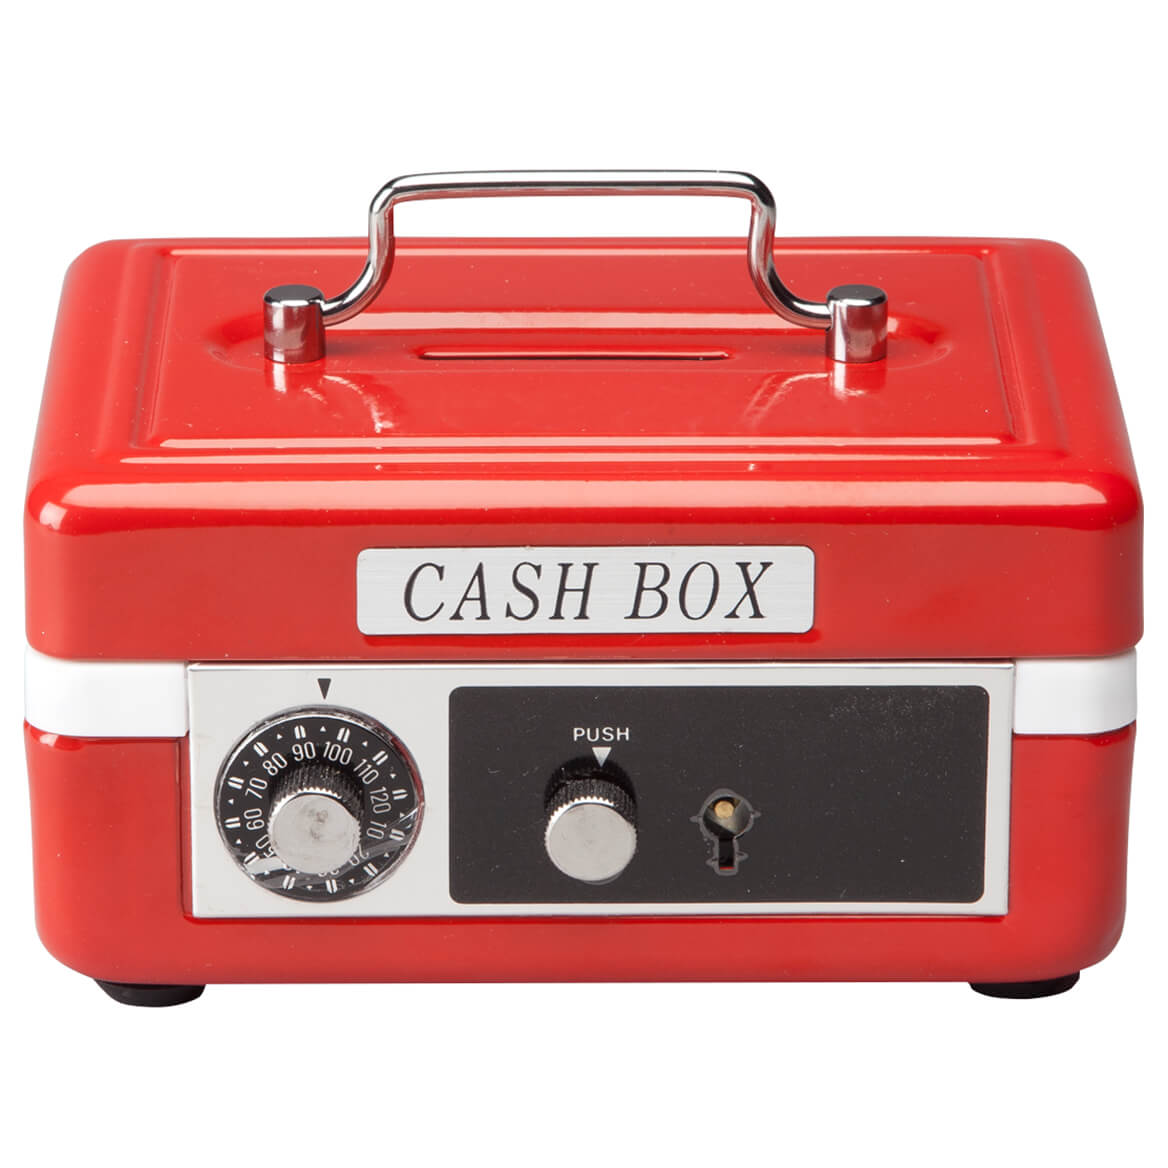 Fox Valley Traders Children’s Cash Box, Metal Piggy Bank Lockbox with Coin Slot, Red